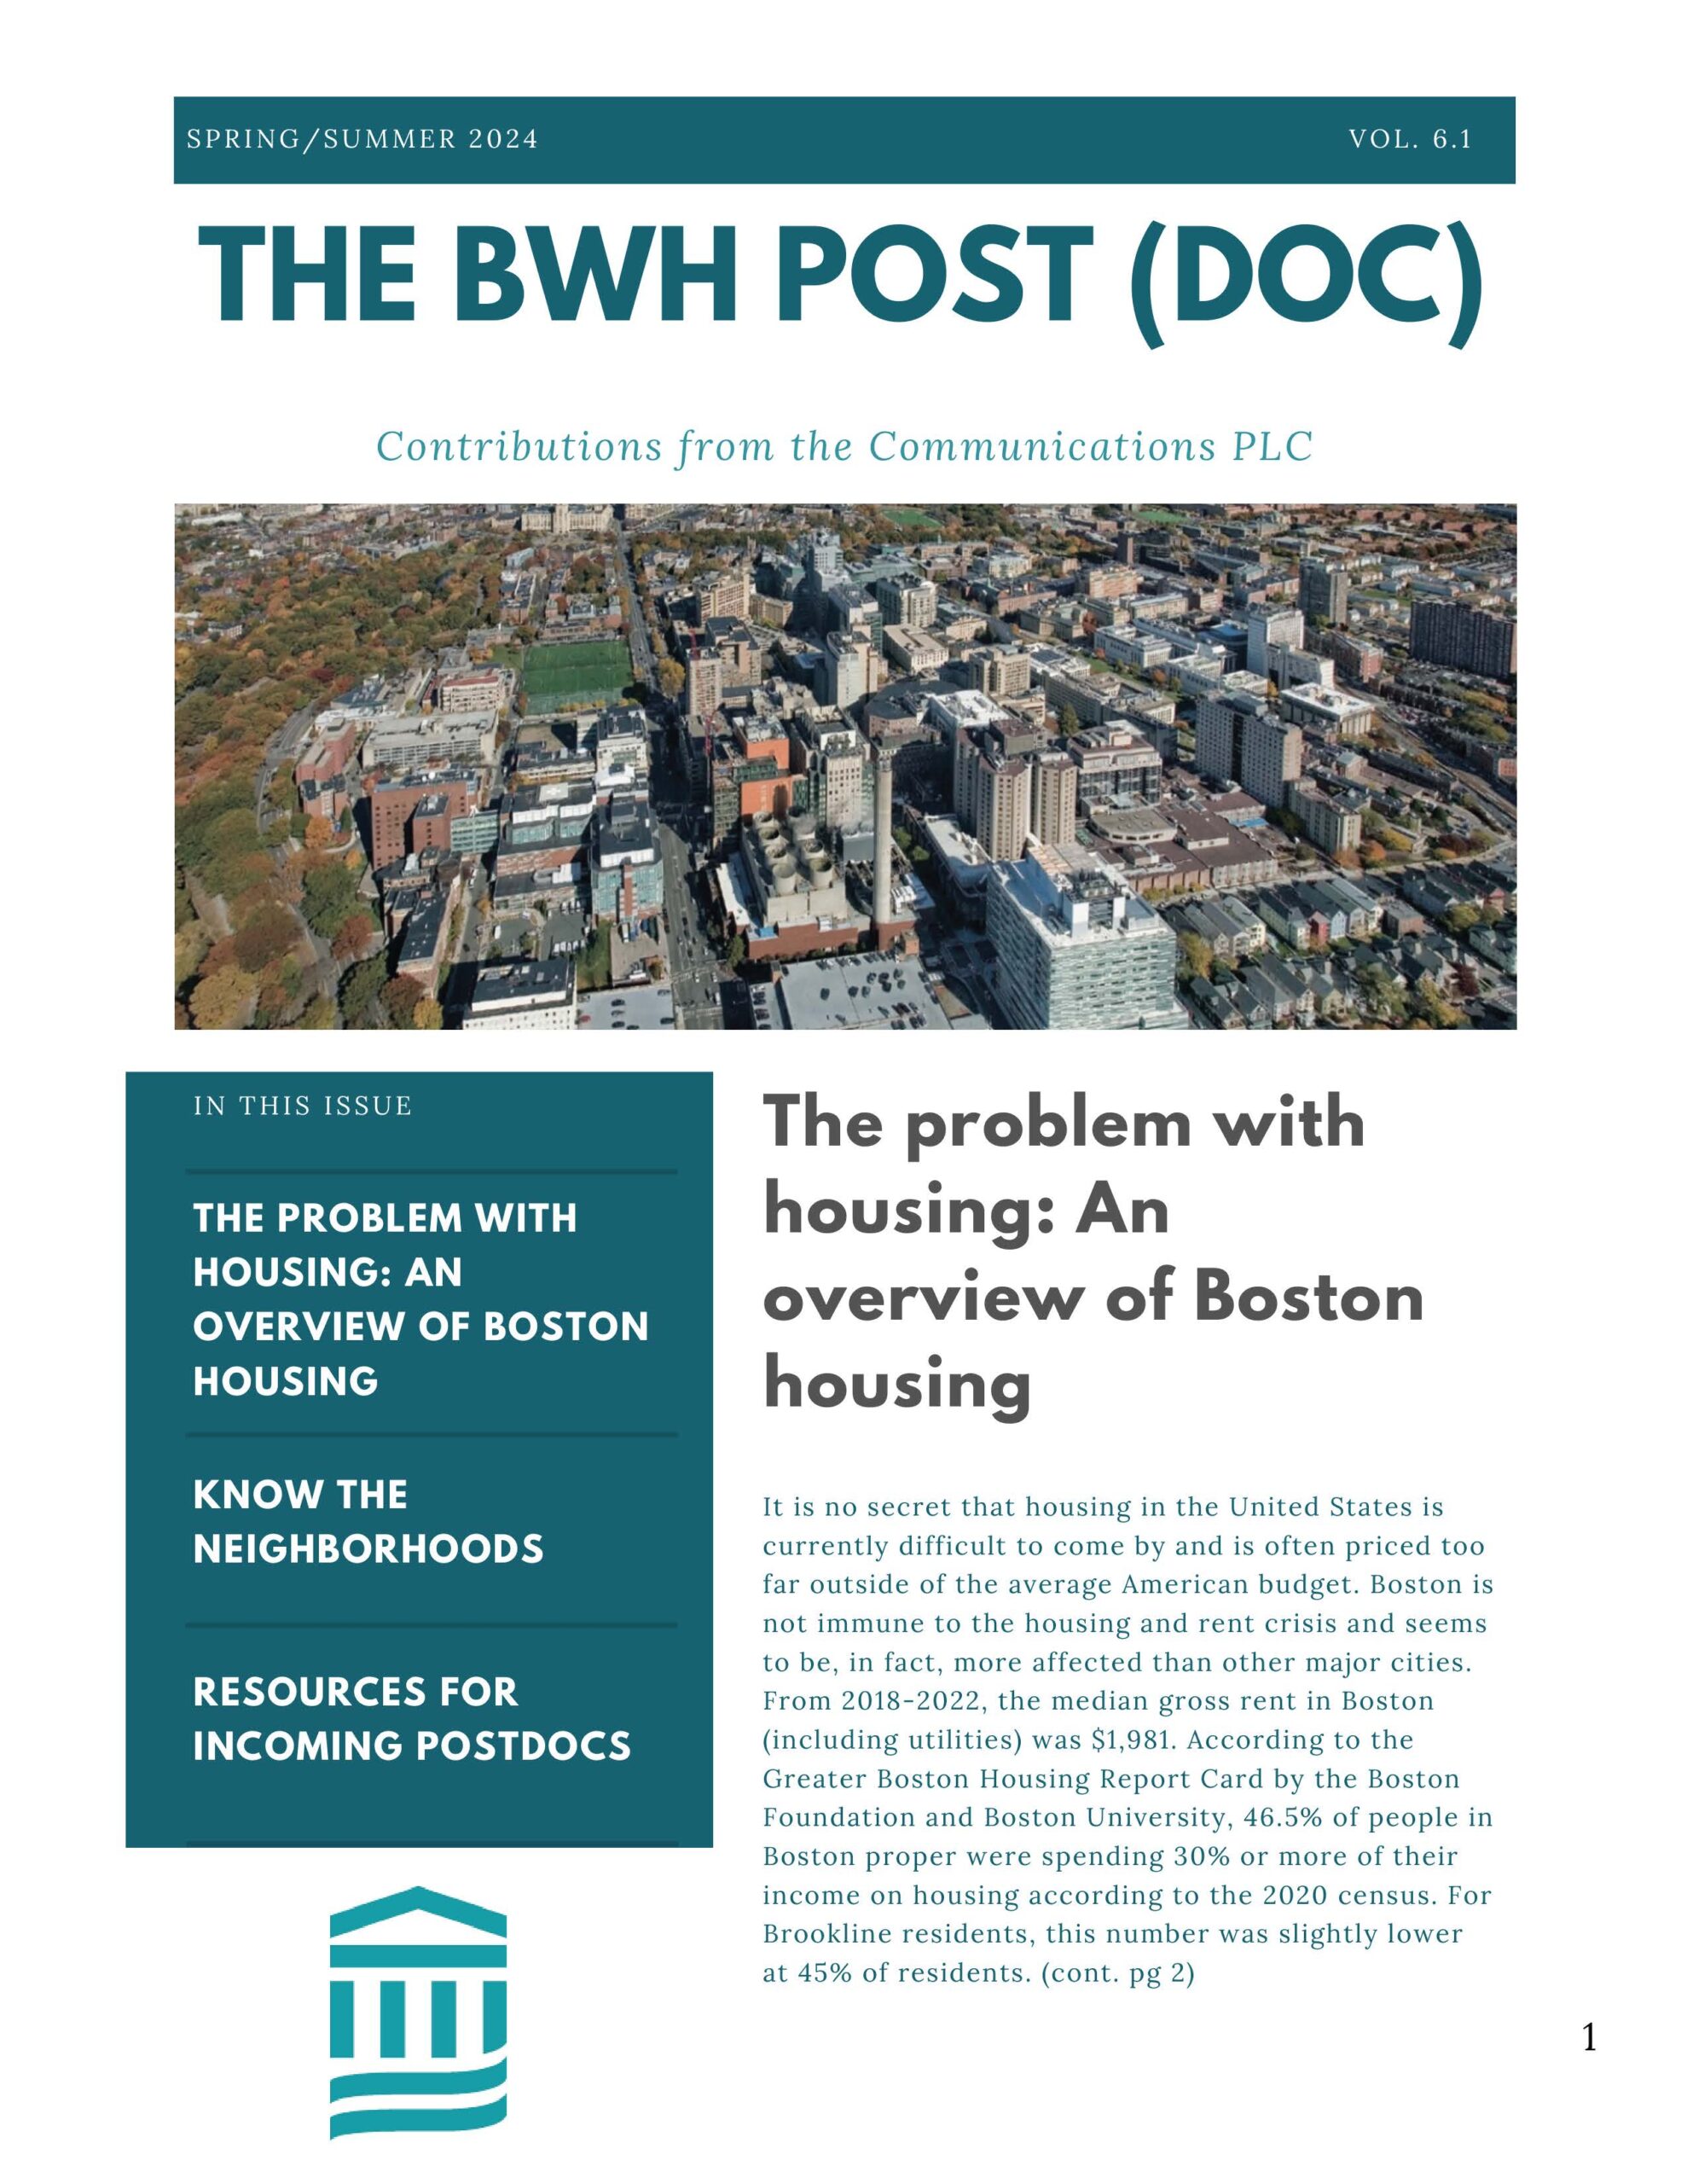 Cover of the 2024 Spring/Summer issue of The BWH Post(Doc) Newsletter.